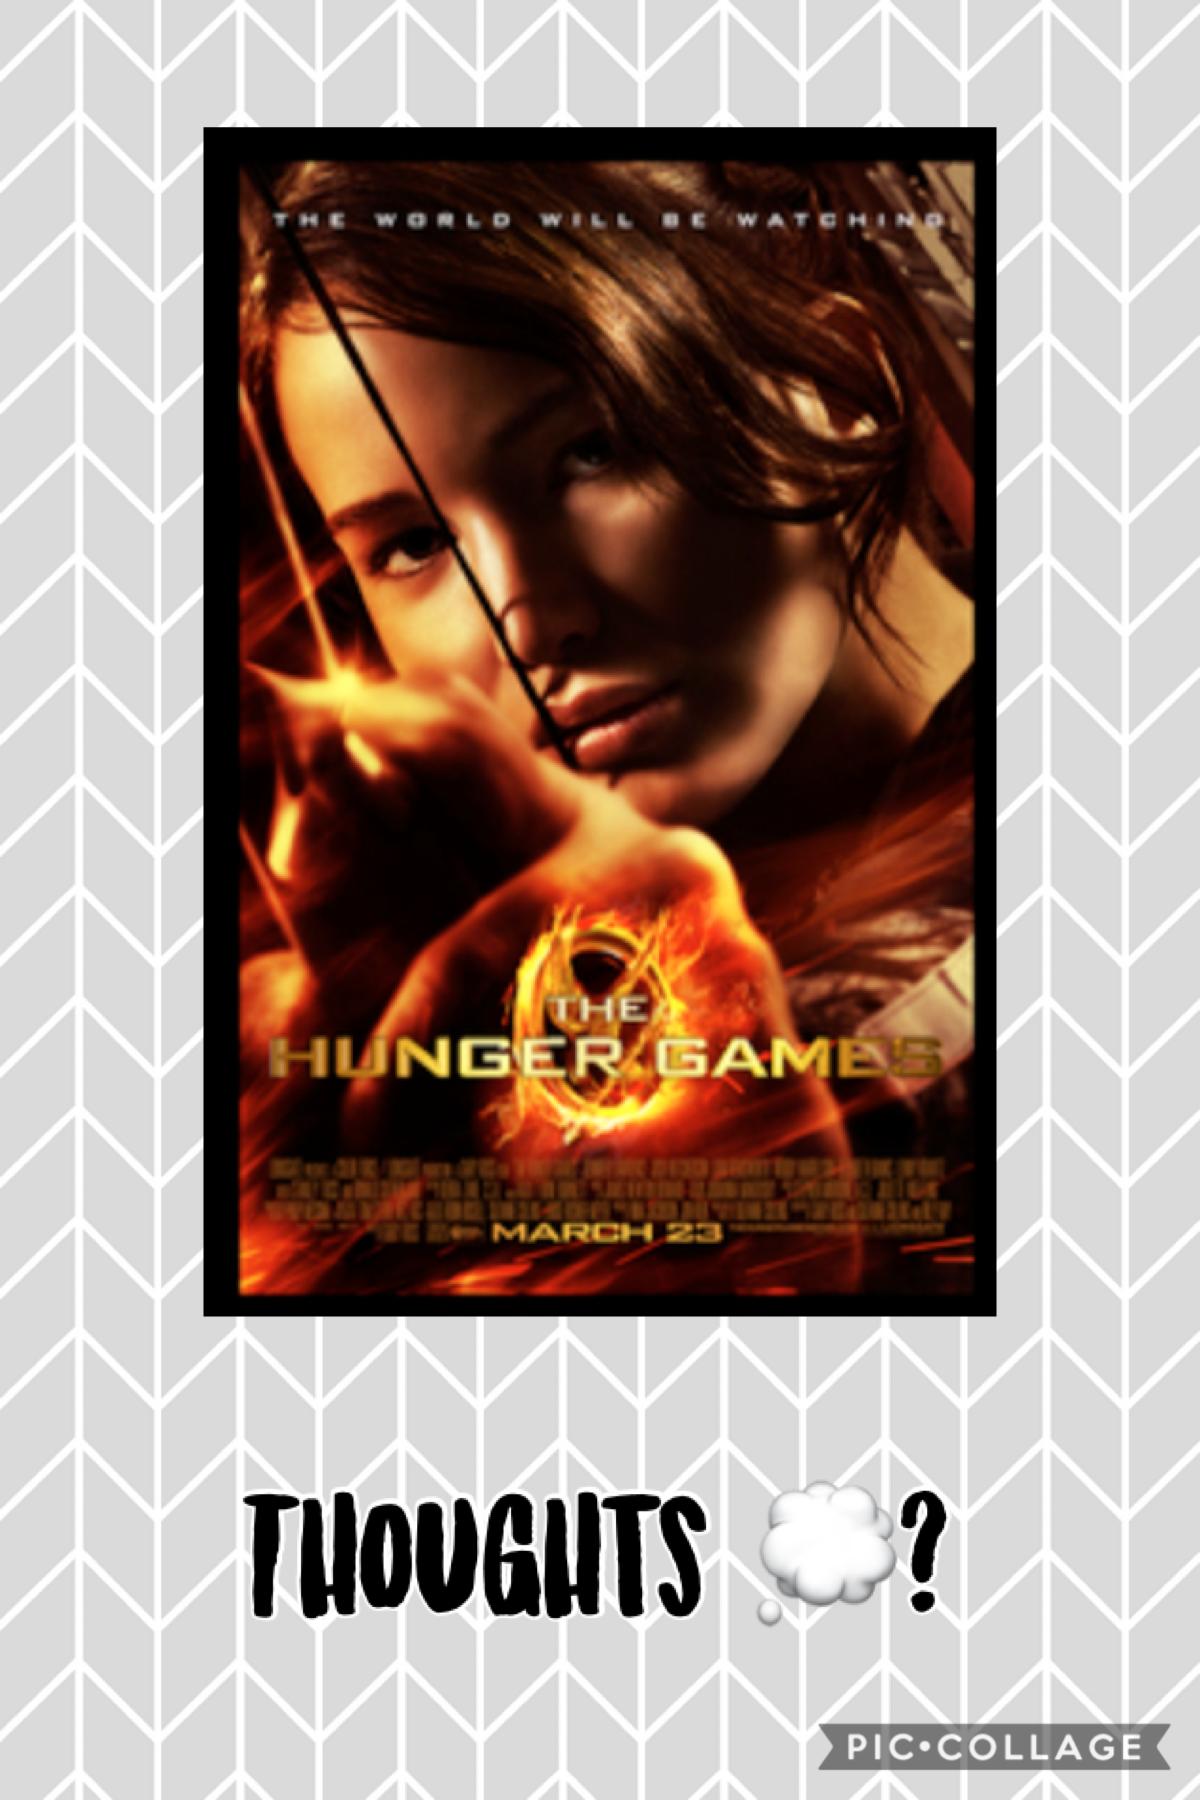 Thoughts on the hunger games? 